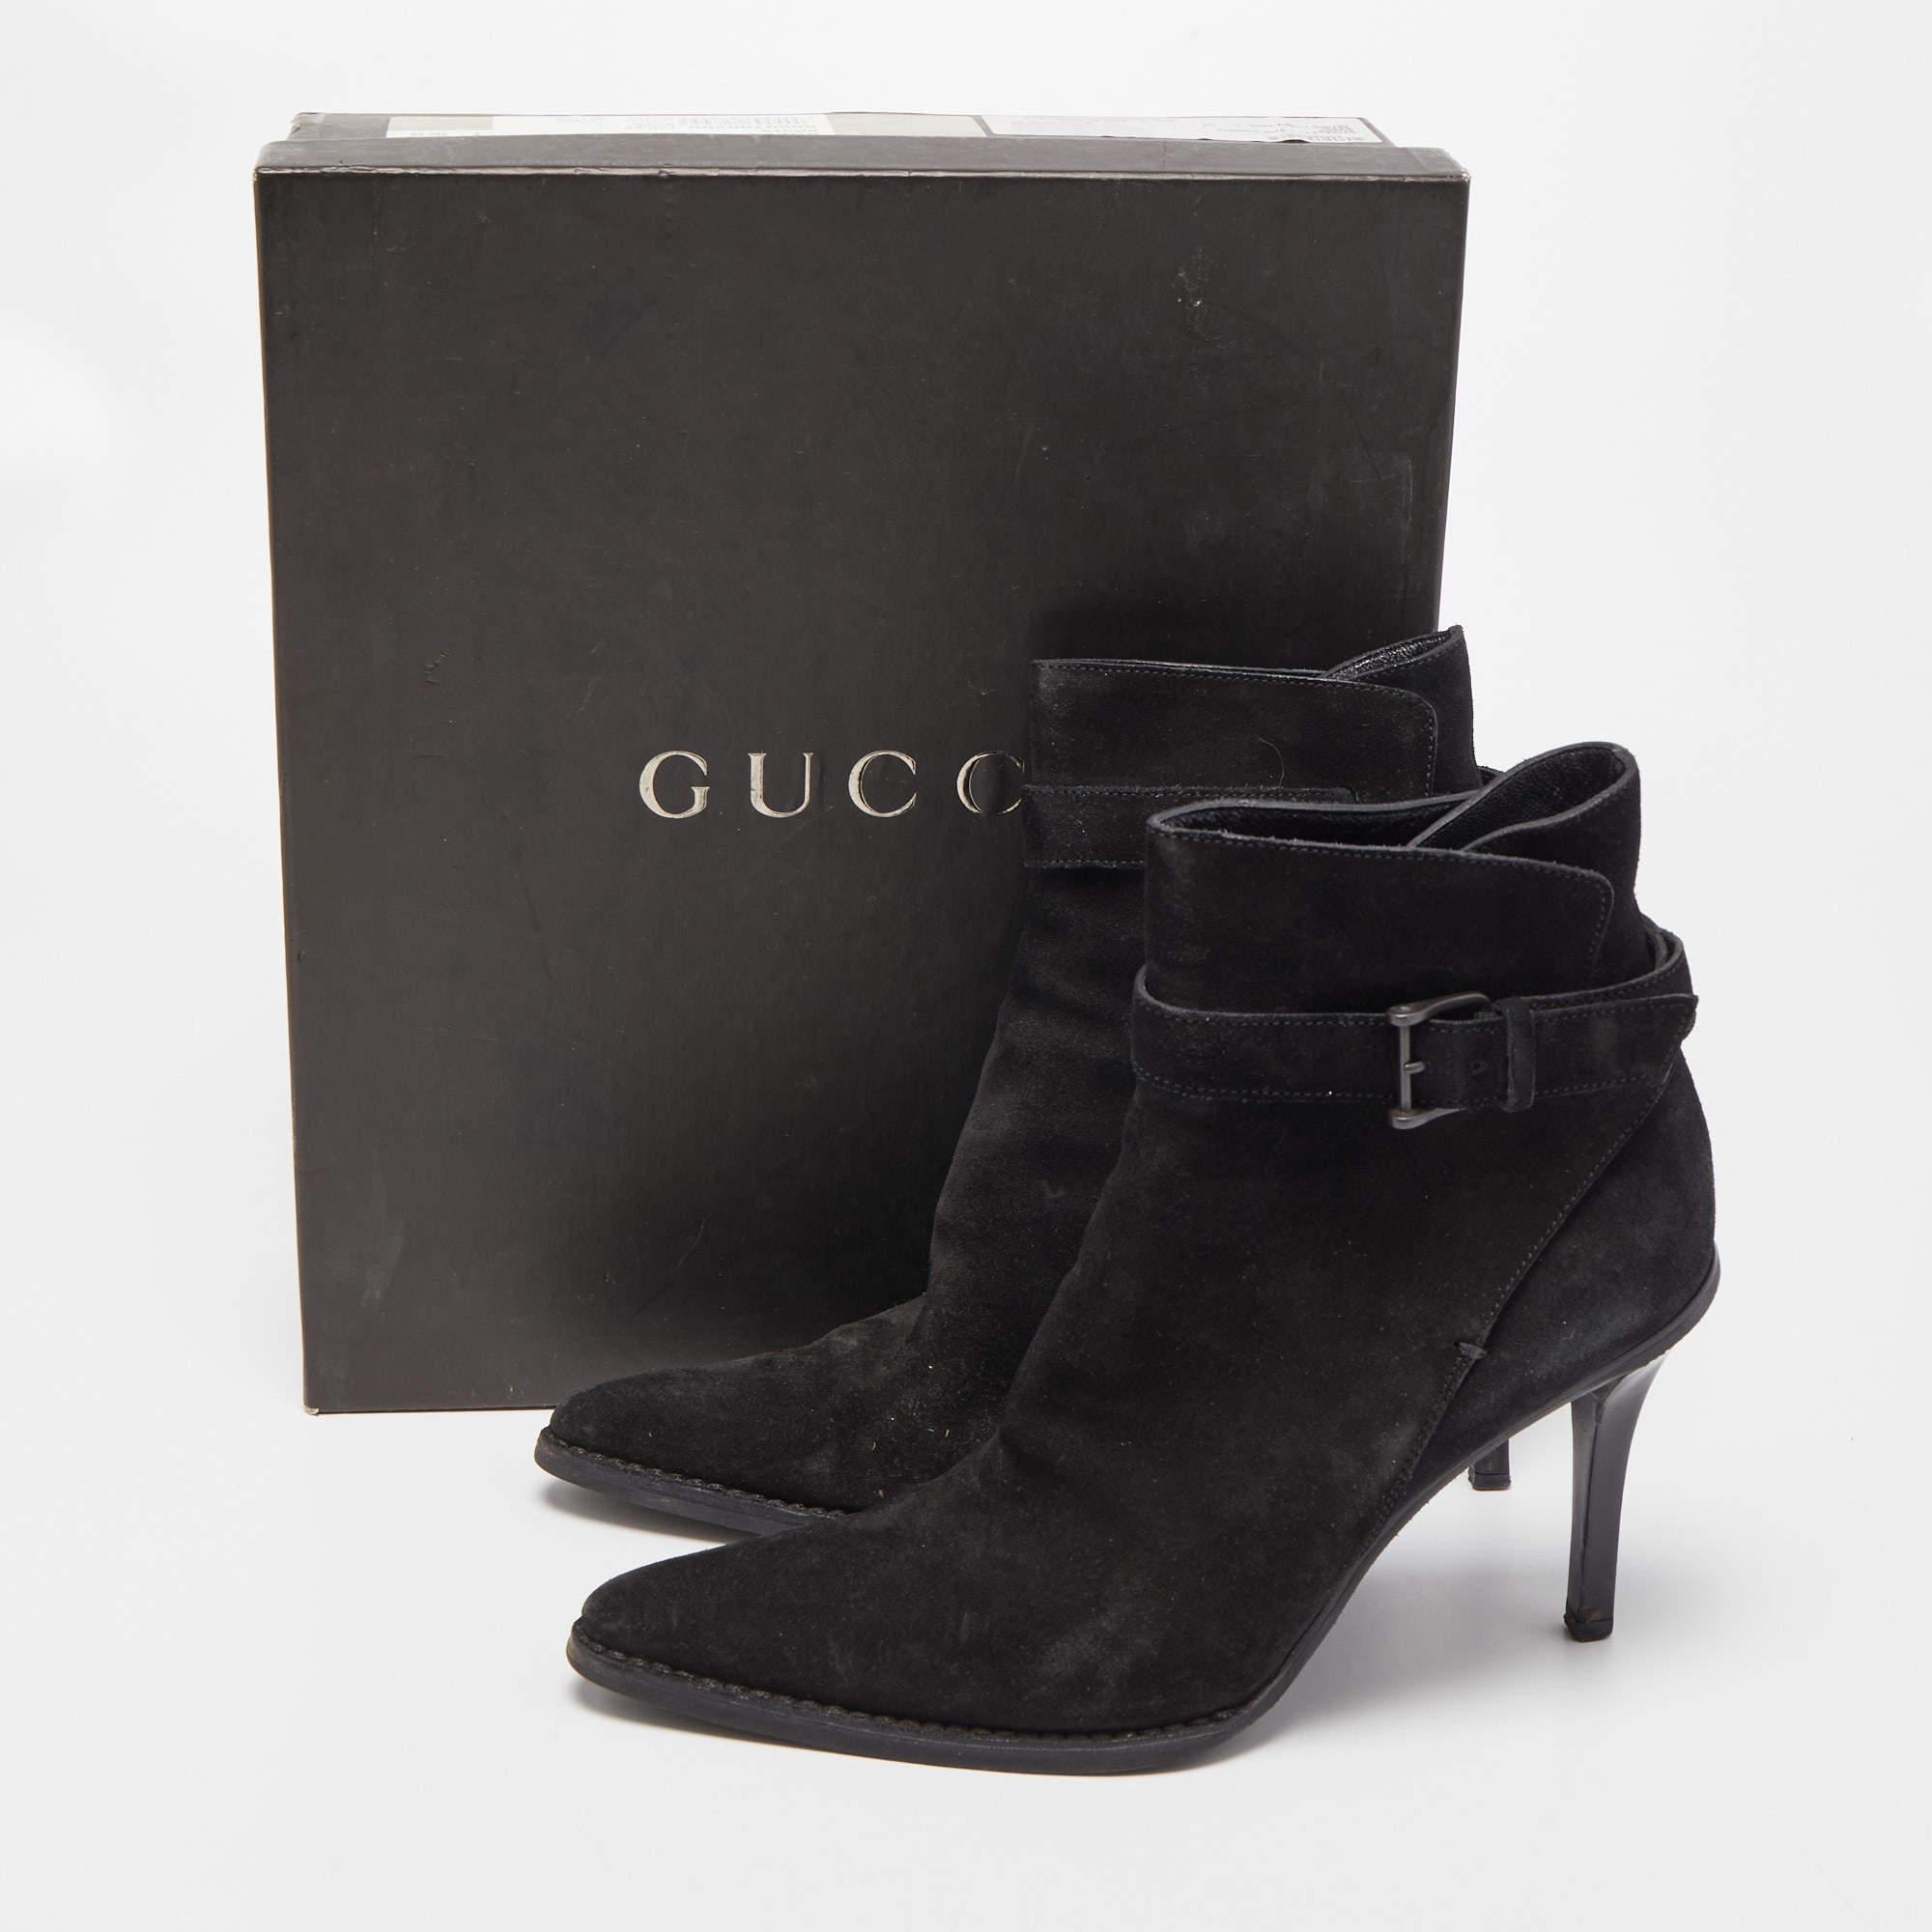 Gucci Black Suede Pointed Toe Ankle Boots Size 39 For Sale 5